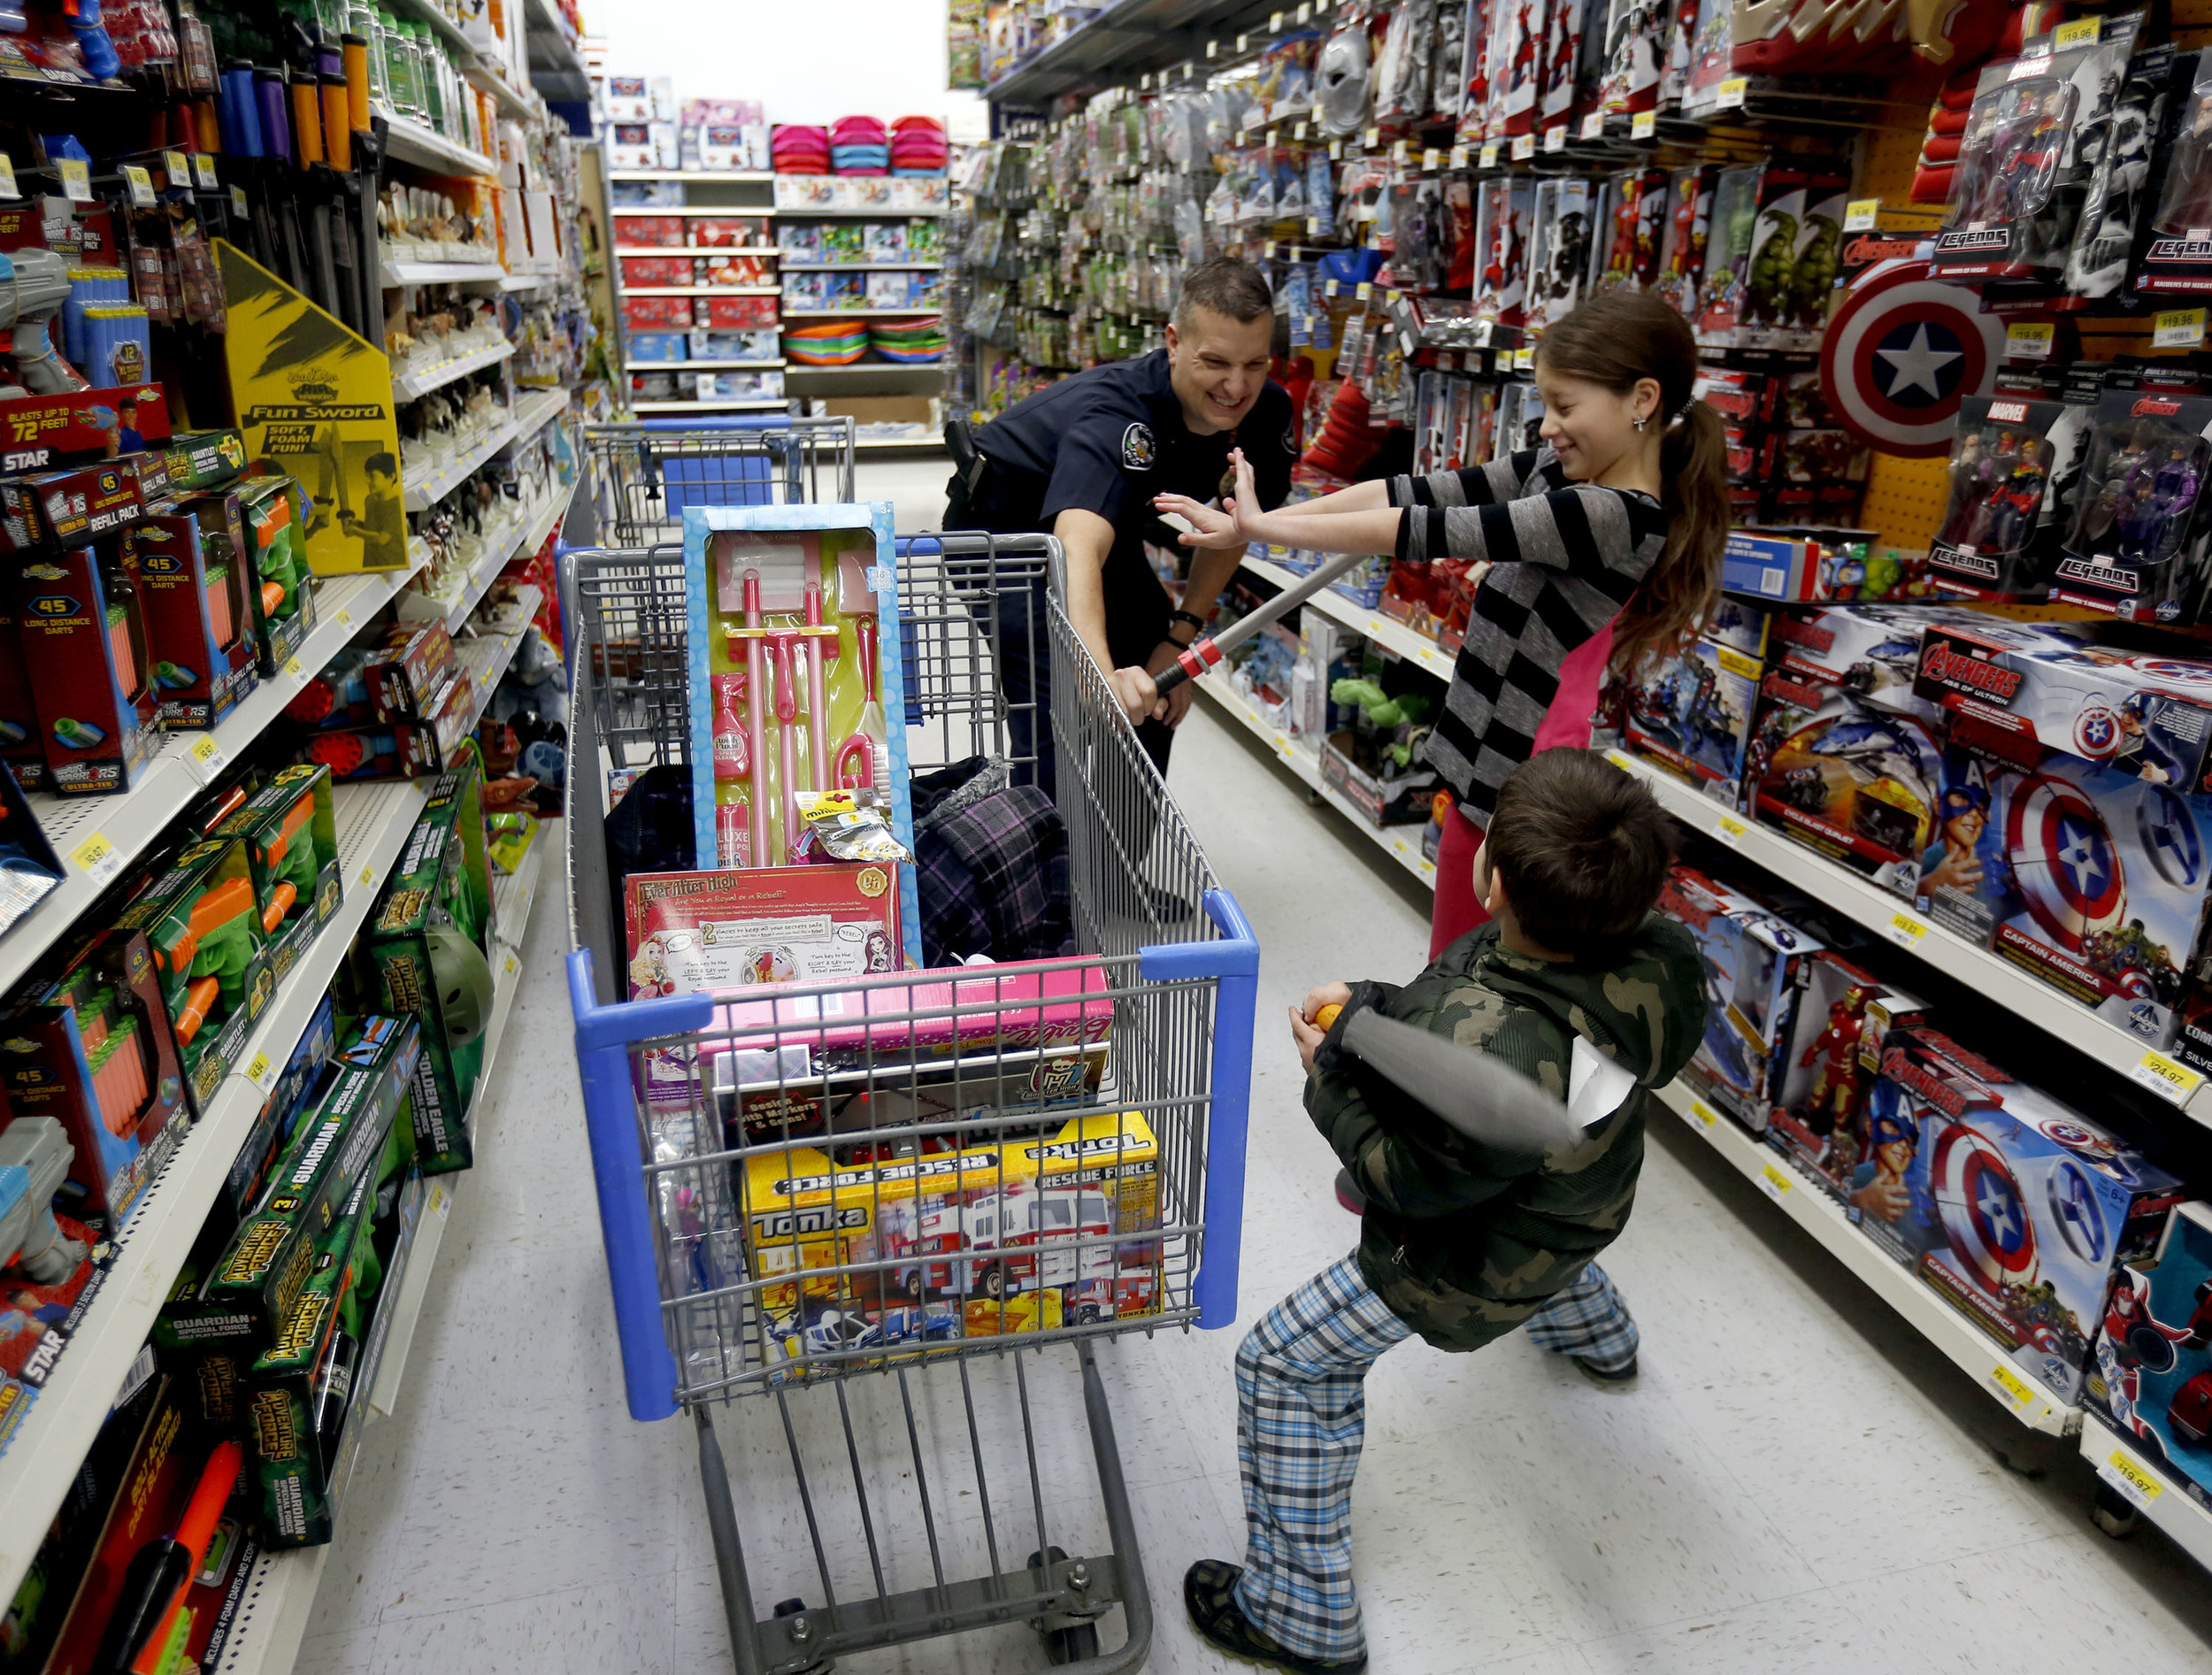  Audrea Martinez, right, 9 of Richland, tries to break up a play toy fight between her brother Roman Canon, 5, and Richland Police Department Officer Eric Edwards Saturday December 12, 2015 during the Shop with a Cop event at the Richland Wal-Mart. M